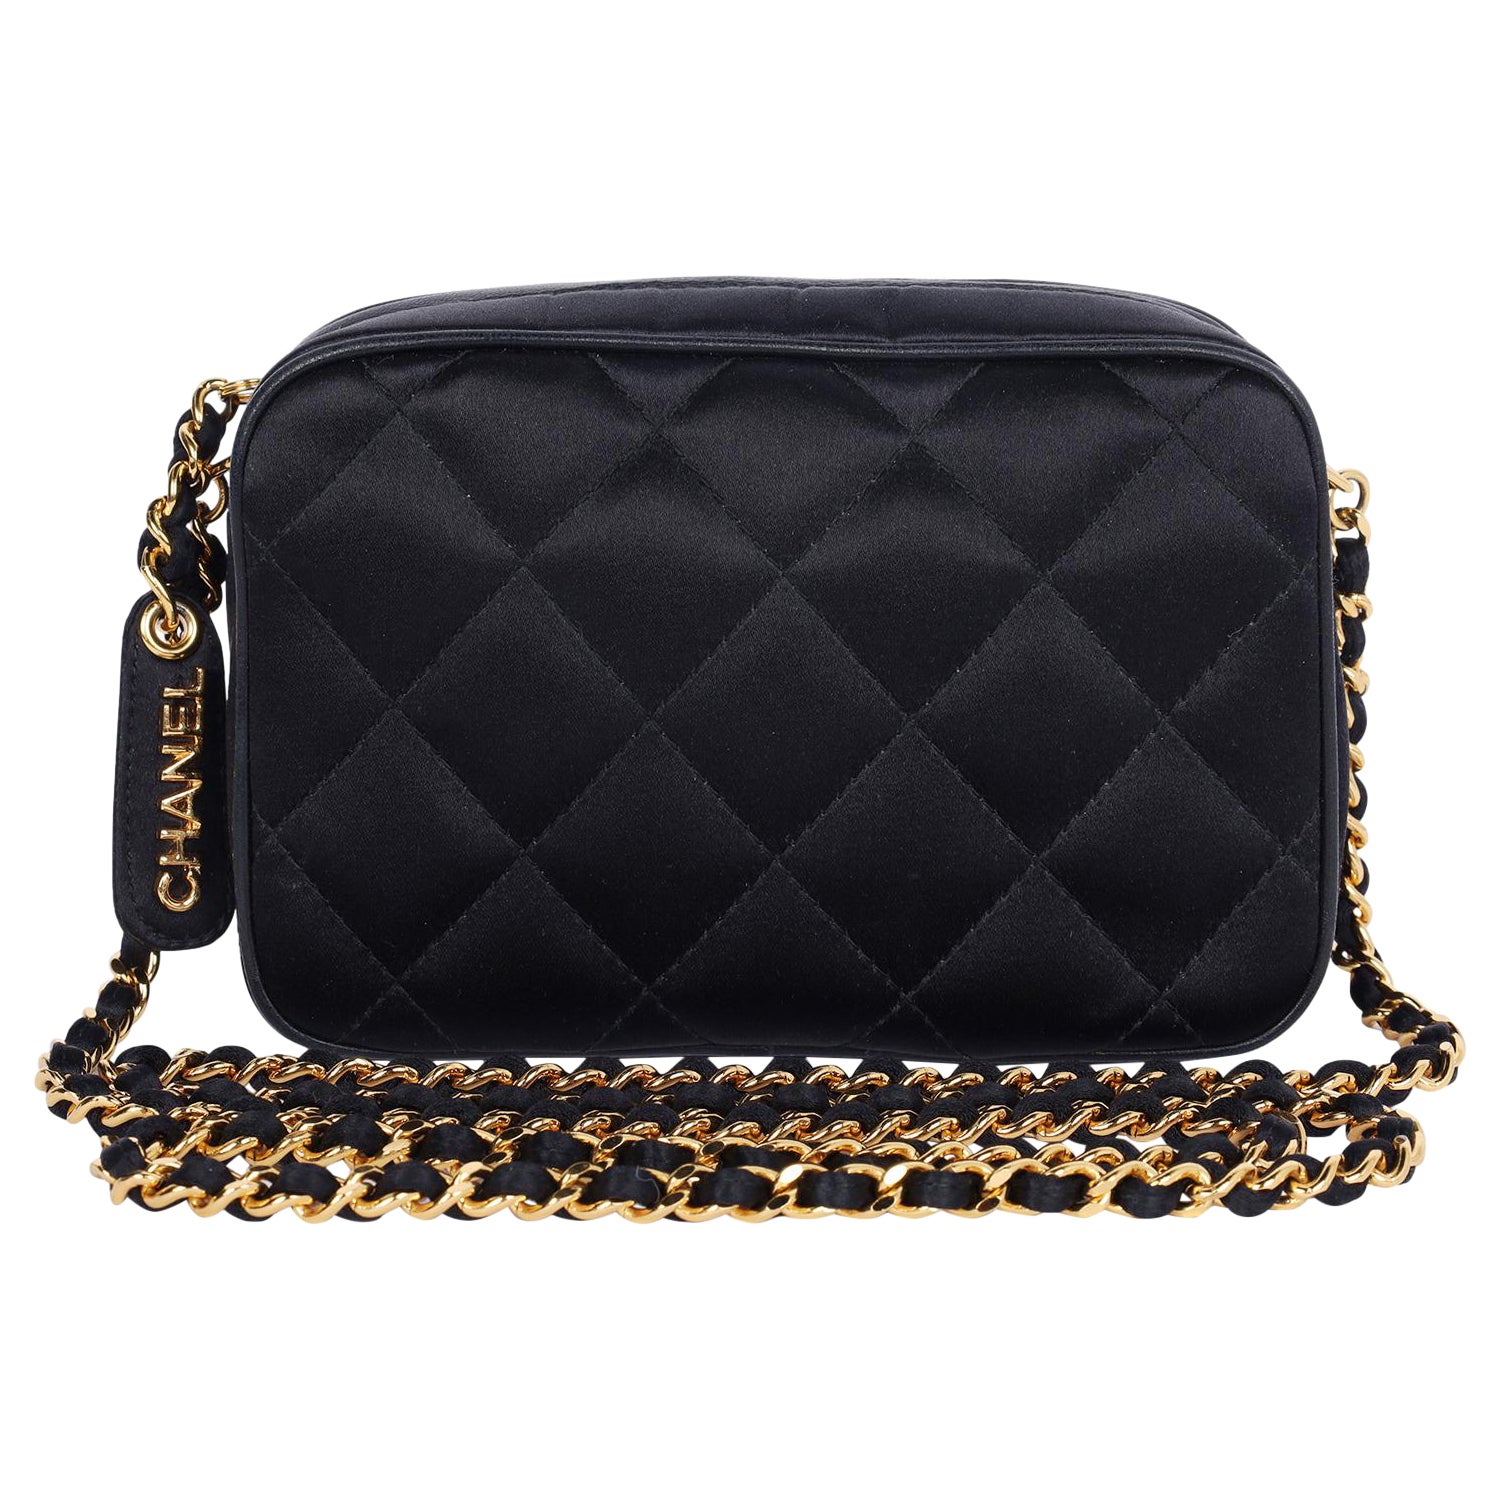 Chanel Mini Satin Leather Quilted Camera Cross Body Bag 1996 For Sale